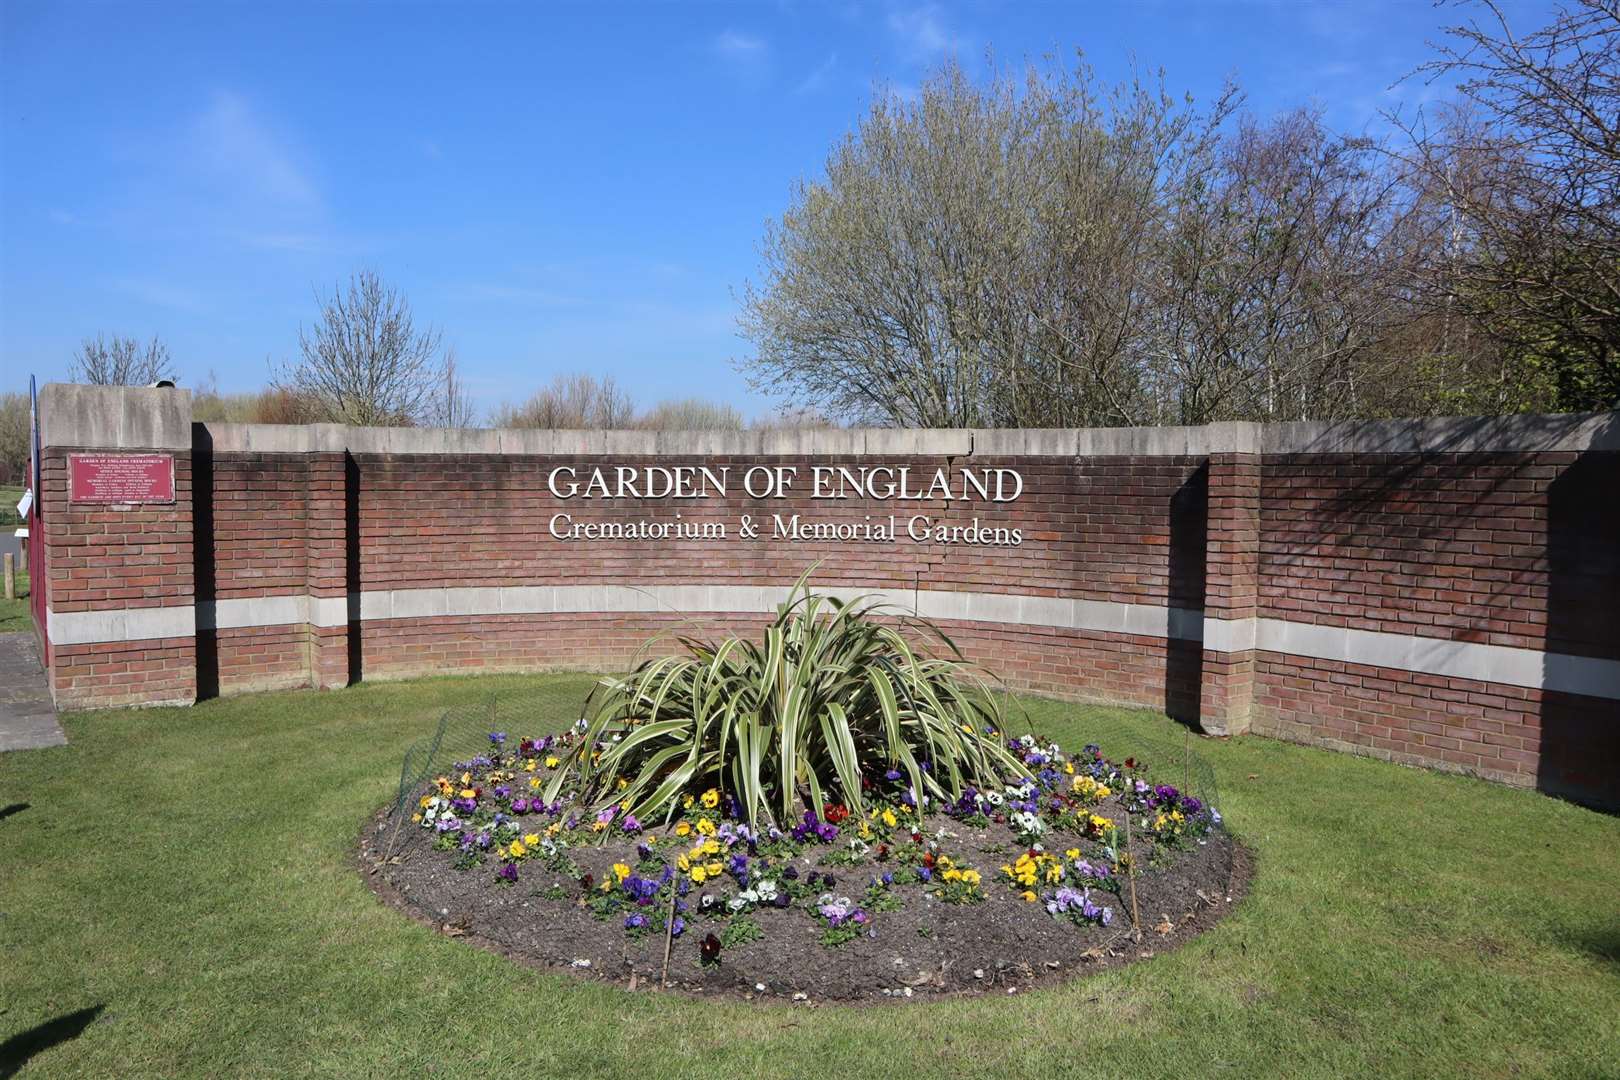 The have been restrictions in place at the Garden of England Crematorium at Bobbing near Sittingbourne